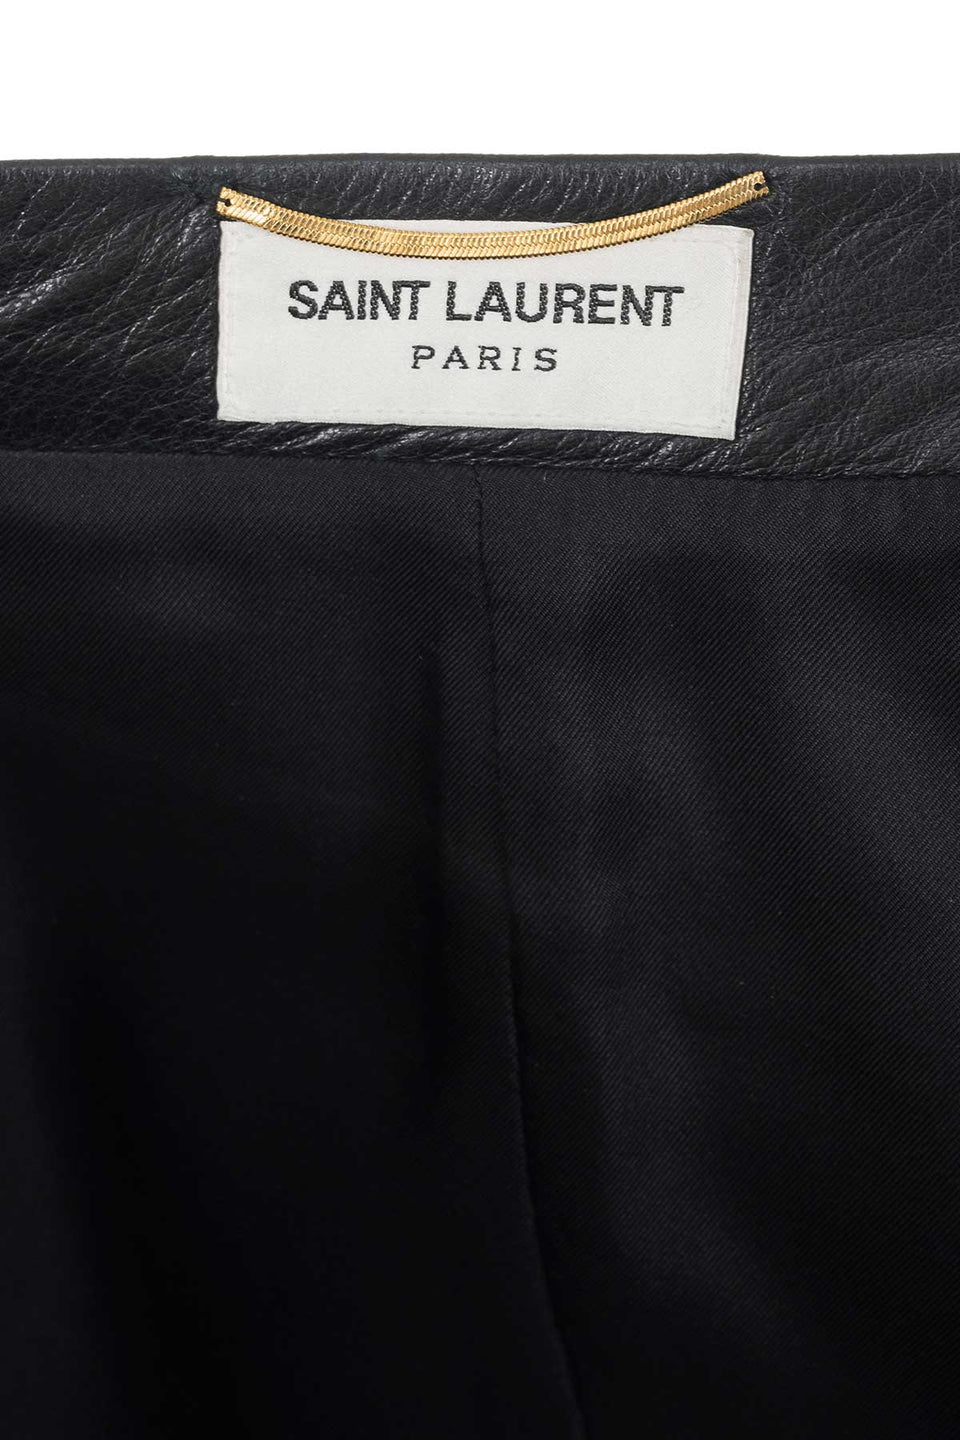 SAINT LAURENT BY ANTHONY VACCARELLO